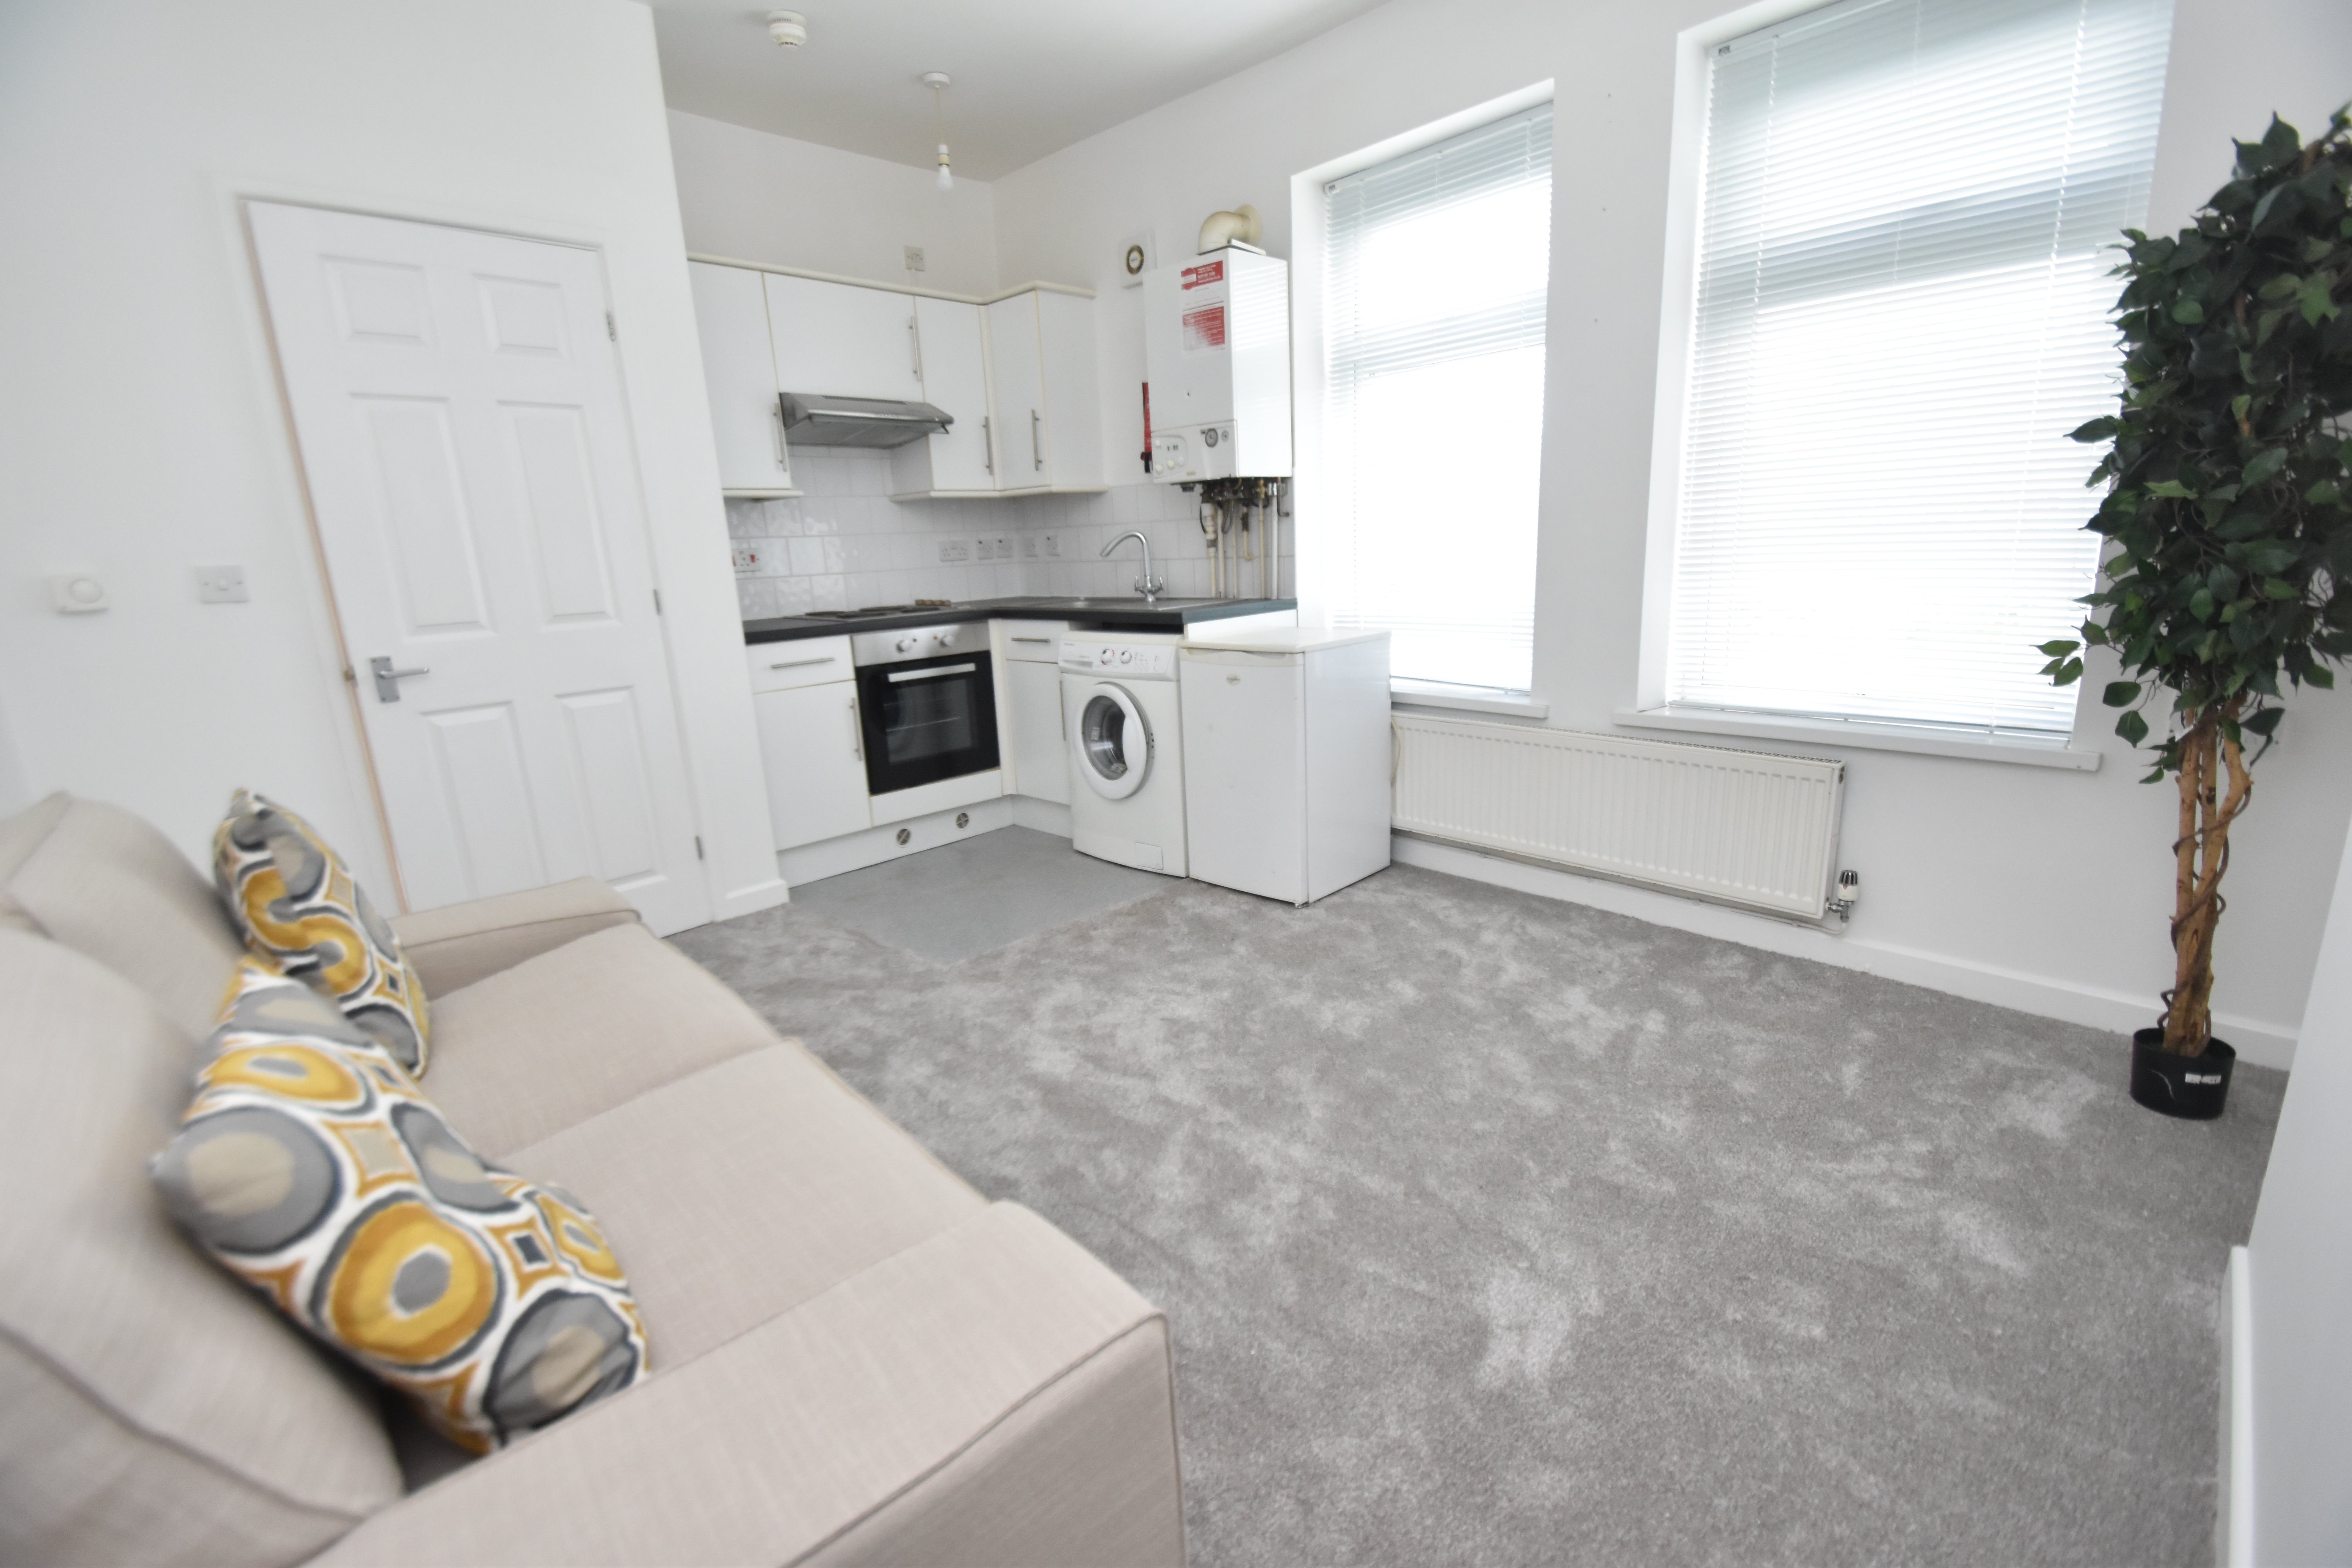 1 bed flat to rent in Riverside Terrace, Cardiff - Property Image 1